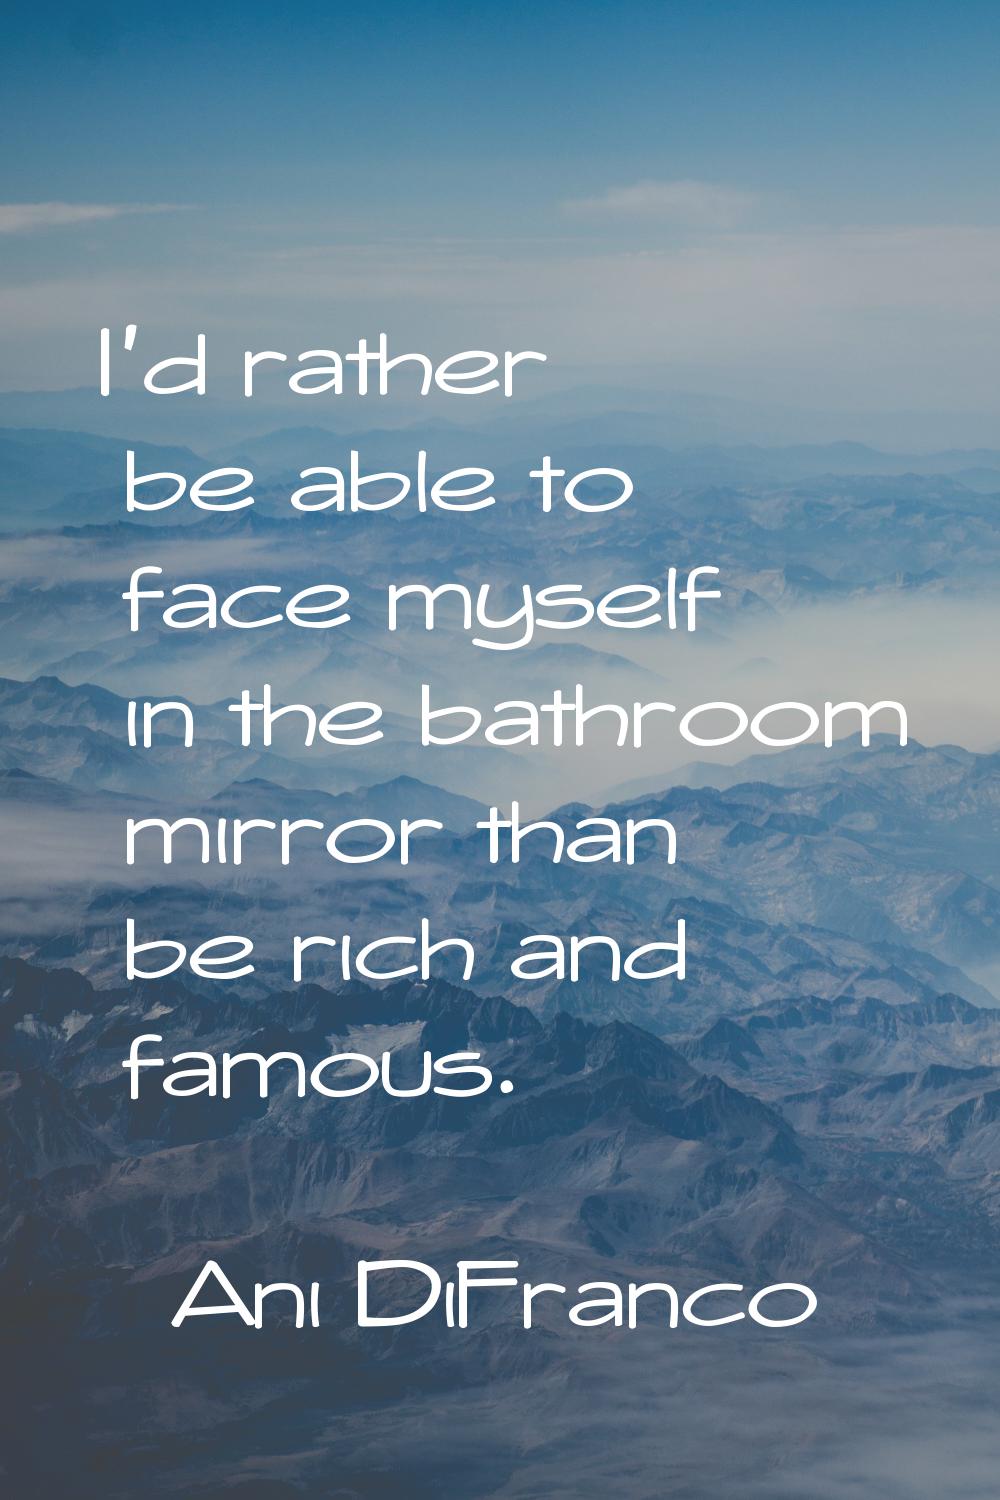 I'd rather be able to face myself in the bathroom mirror than be rich and famous.